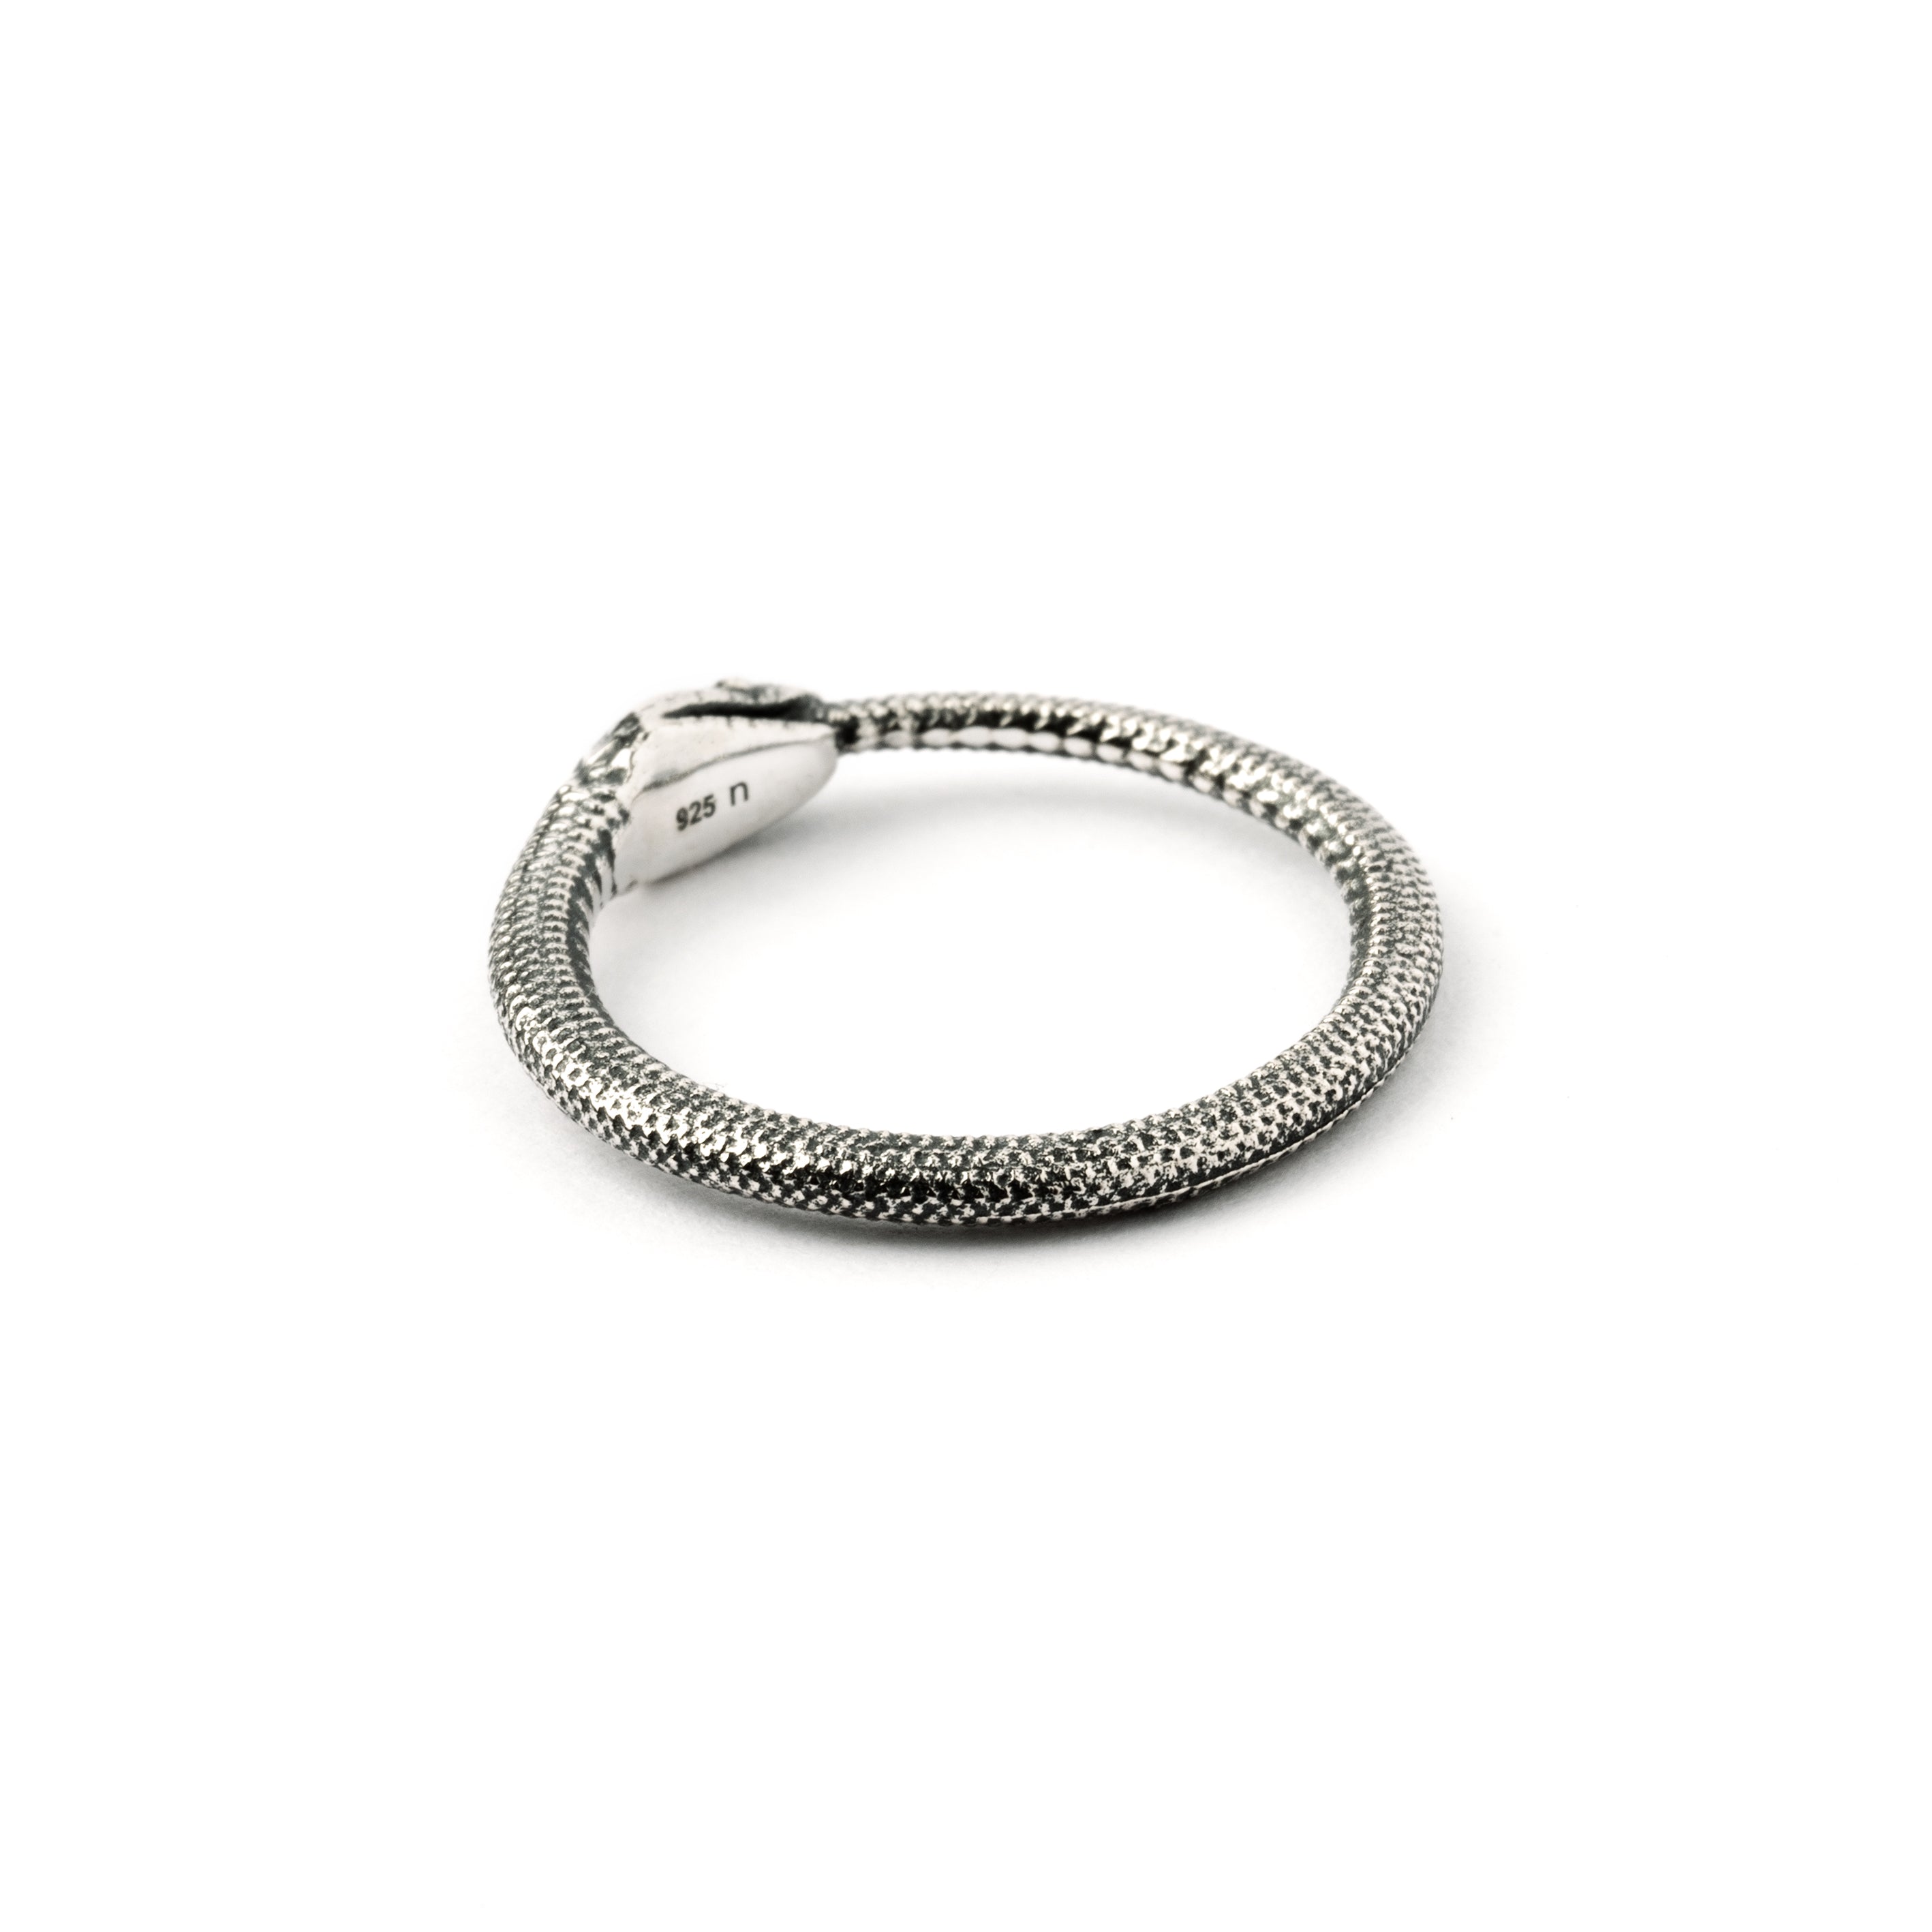 Silver Ouroboros snake band ring back side view